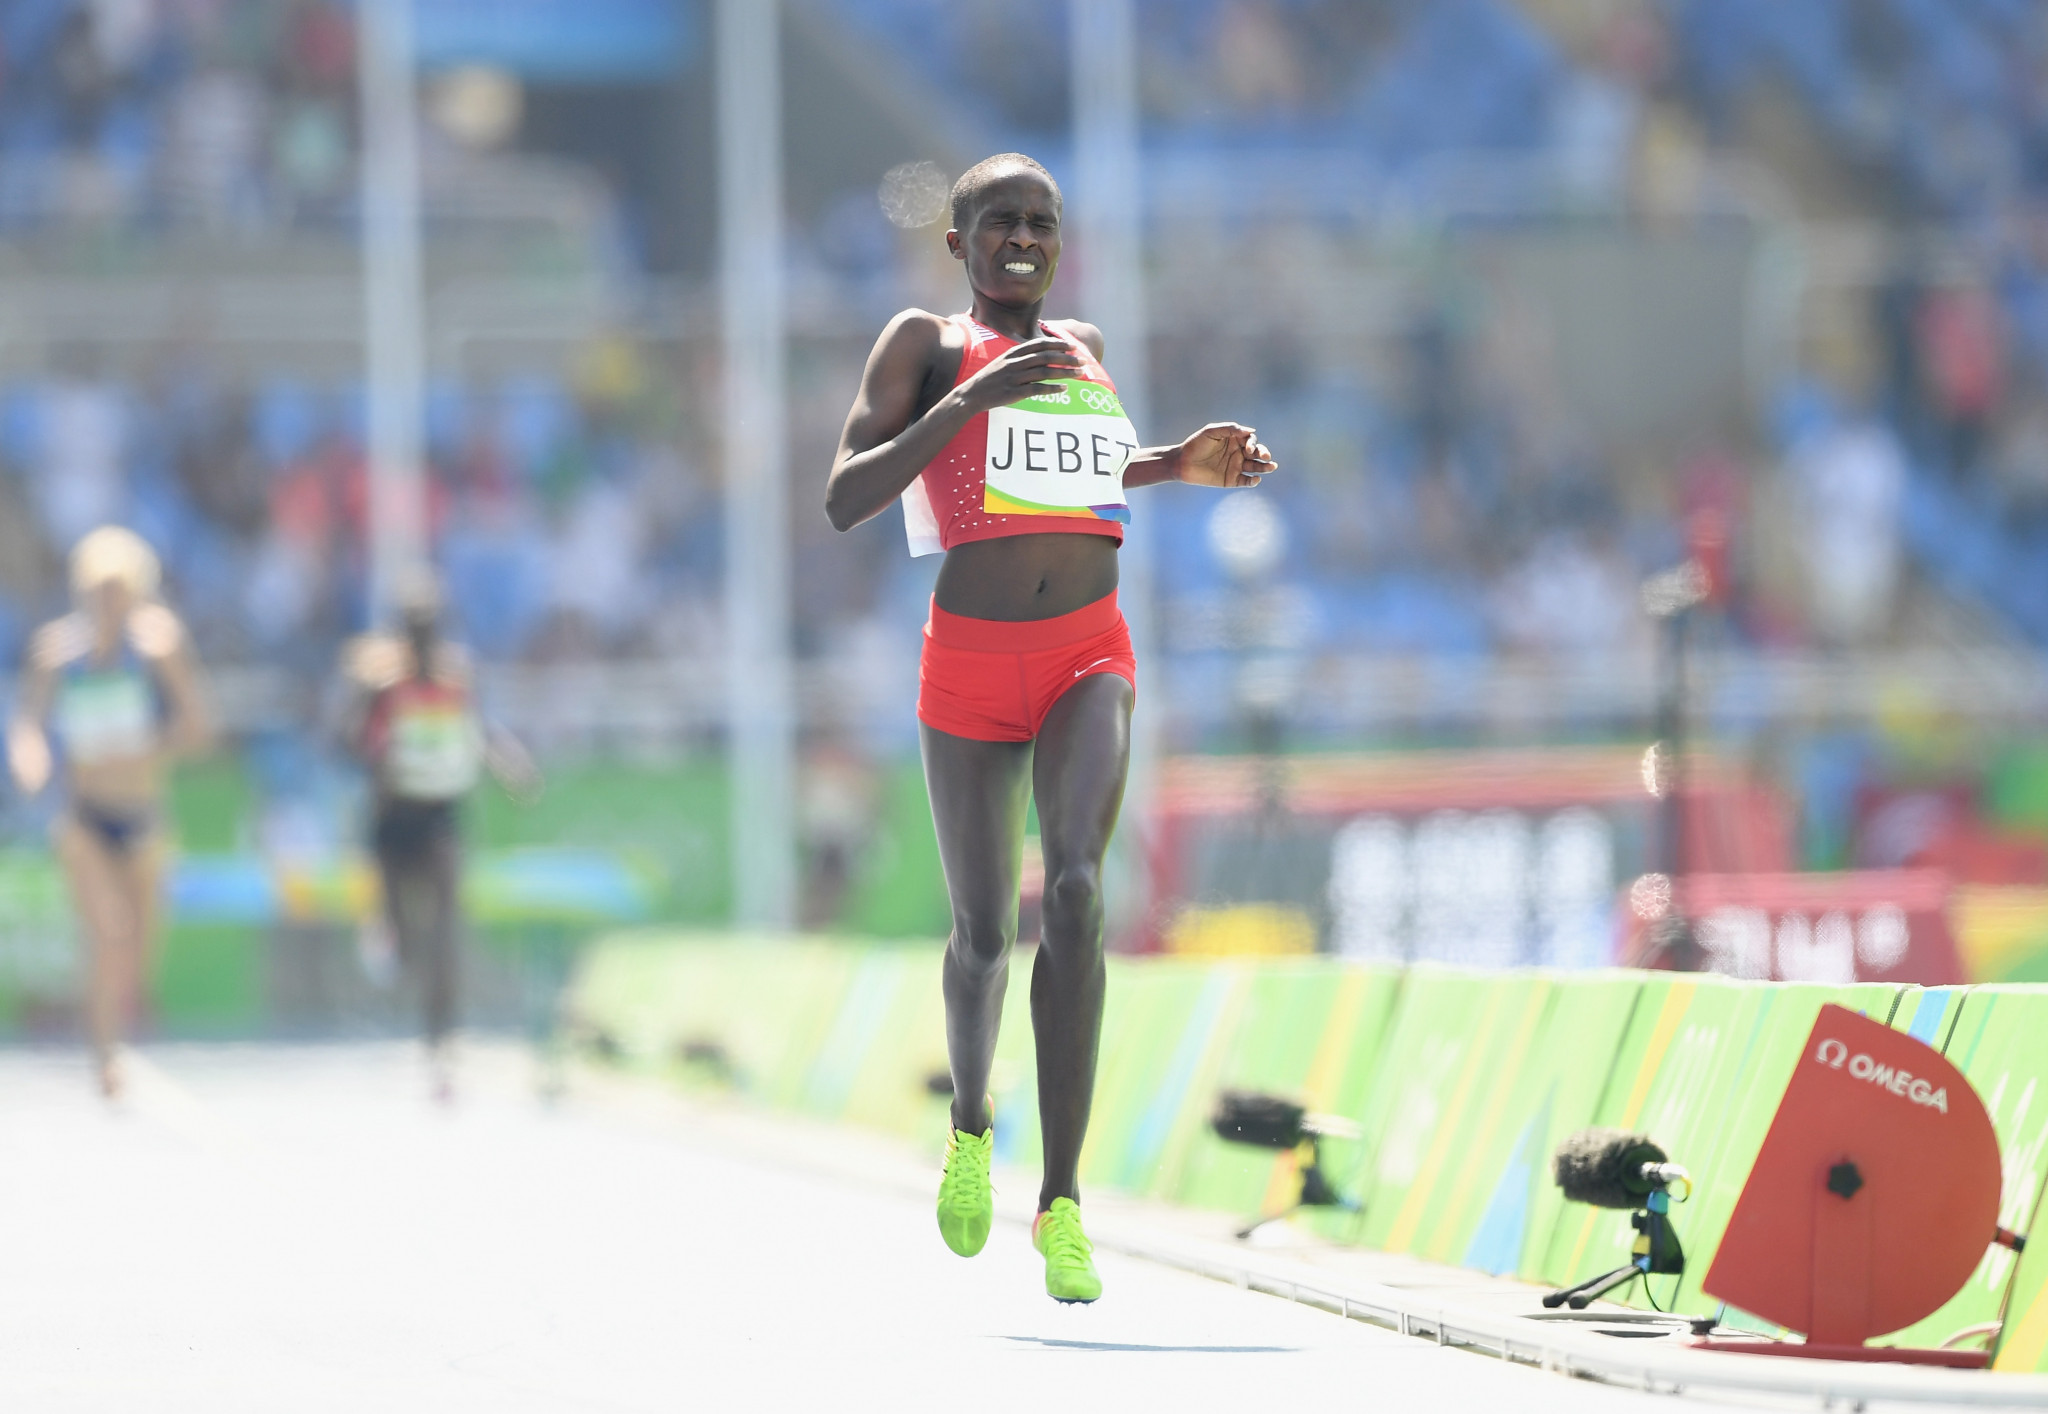 Olympic steeplechase champion Jebet handed four-year doping ban